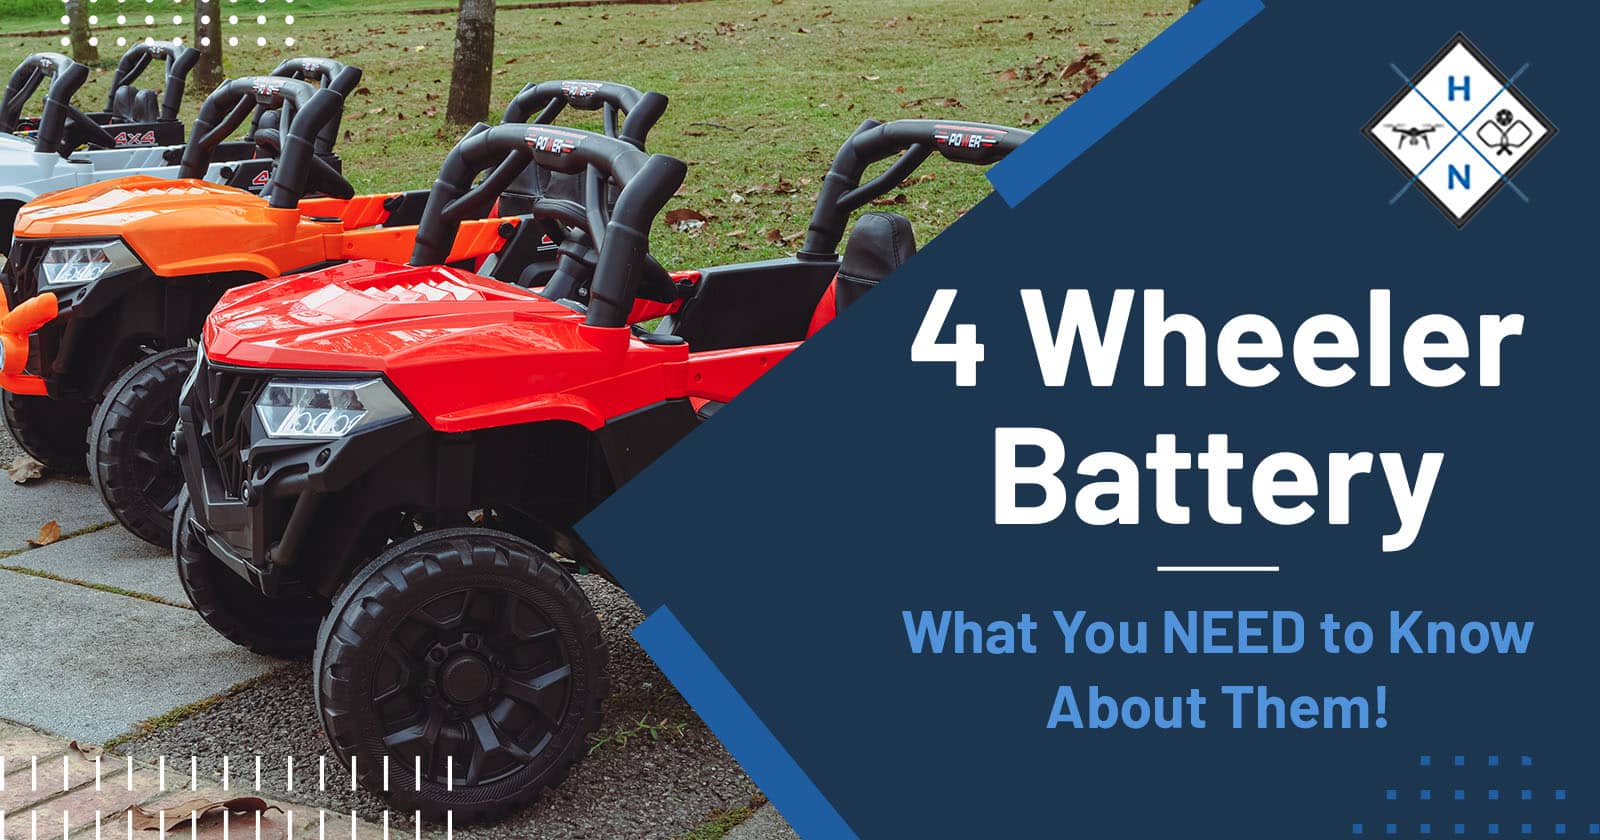 4 Wheeler Battery &#8211; What You NEED to Know About Them!